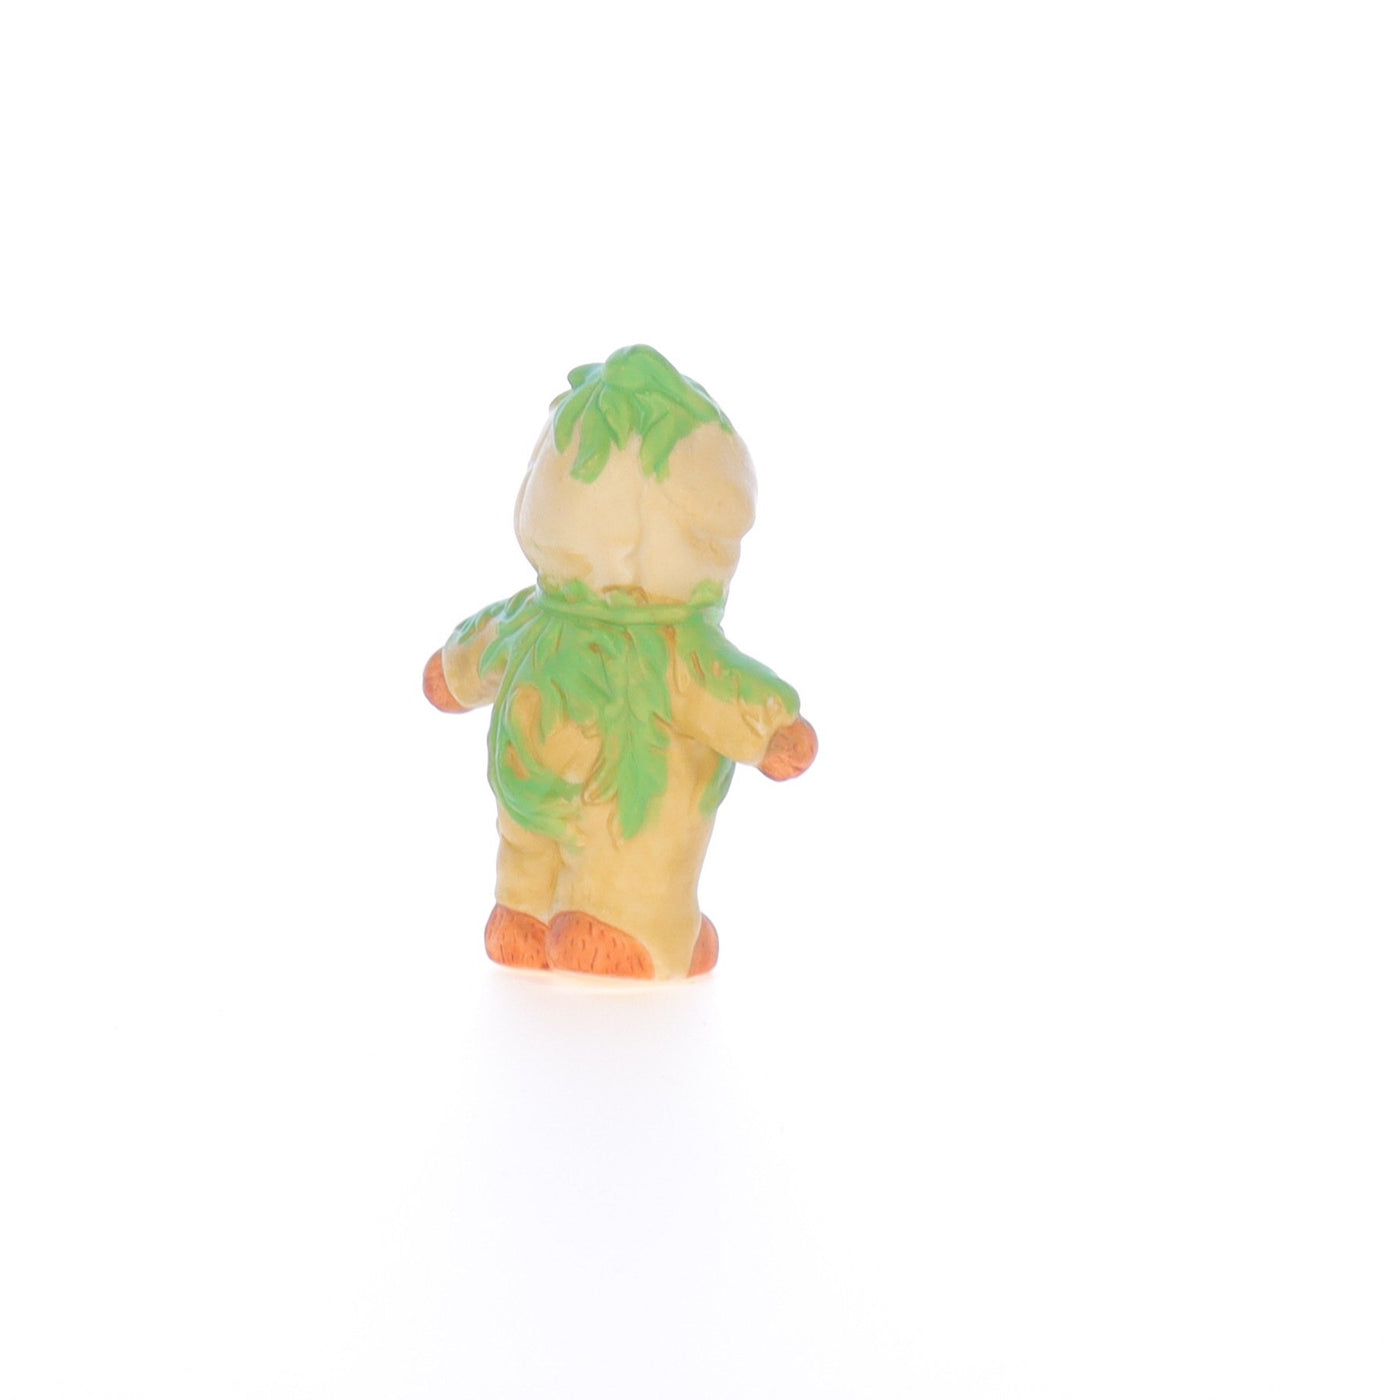 Lucy_And_Me_by_Lucy_Atwell_Porcelain_Figurine_Bear_with_Green_Flower_Costume_Lucy_Unknown_013_06